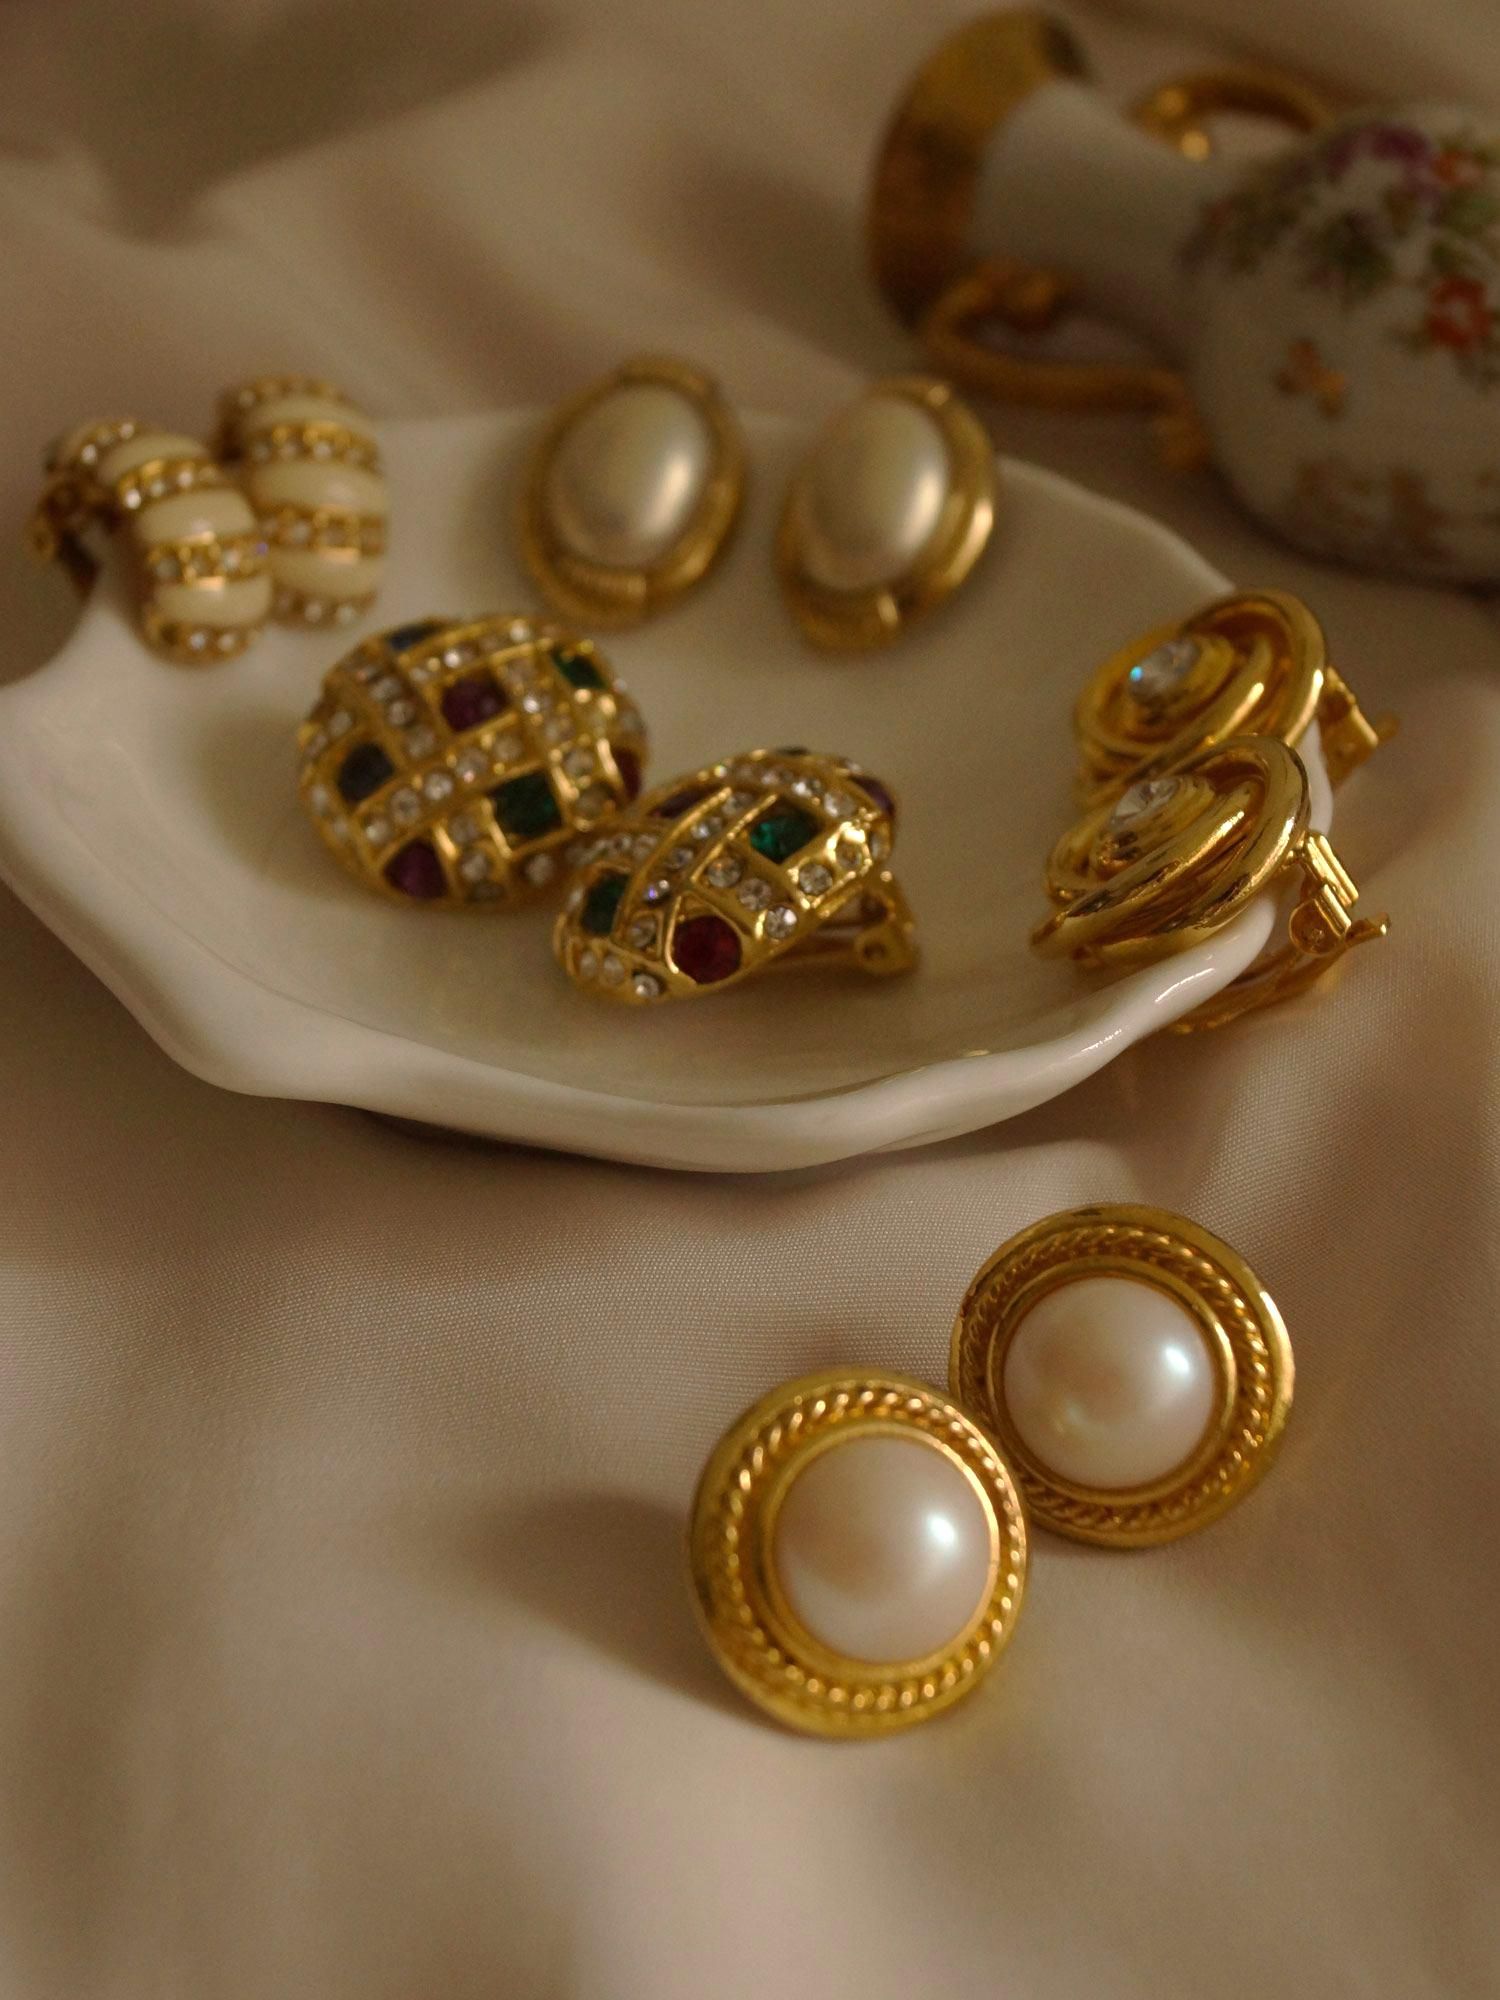 Get a stylish look with vintage earrings